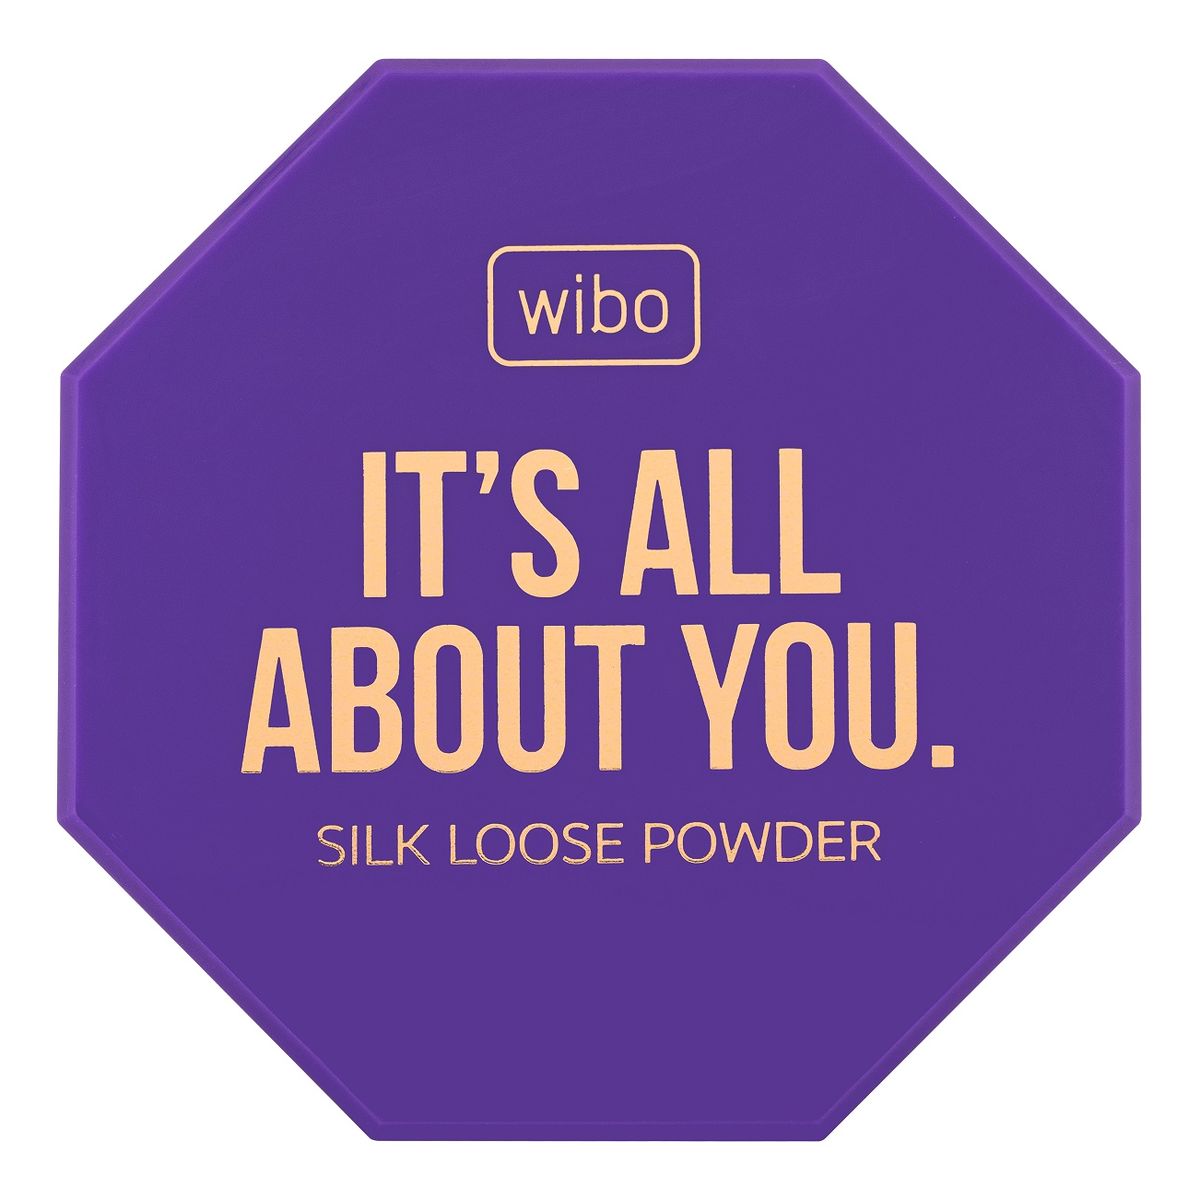 Wibo It's All About You Silk Loose Powder Sypki puder do twarzy 6g